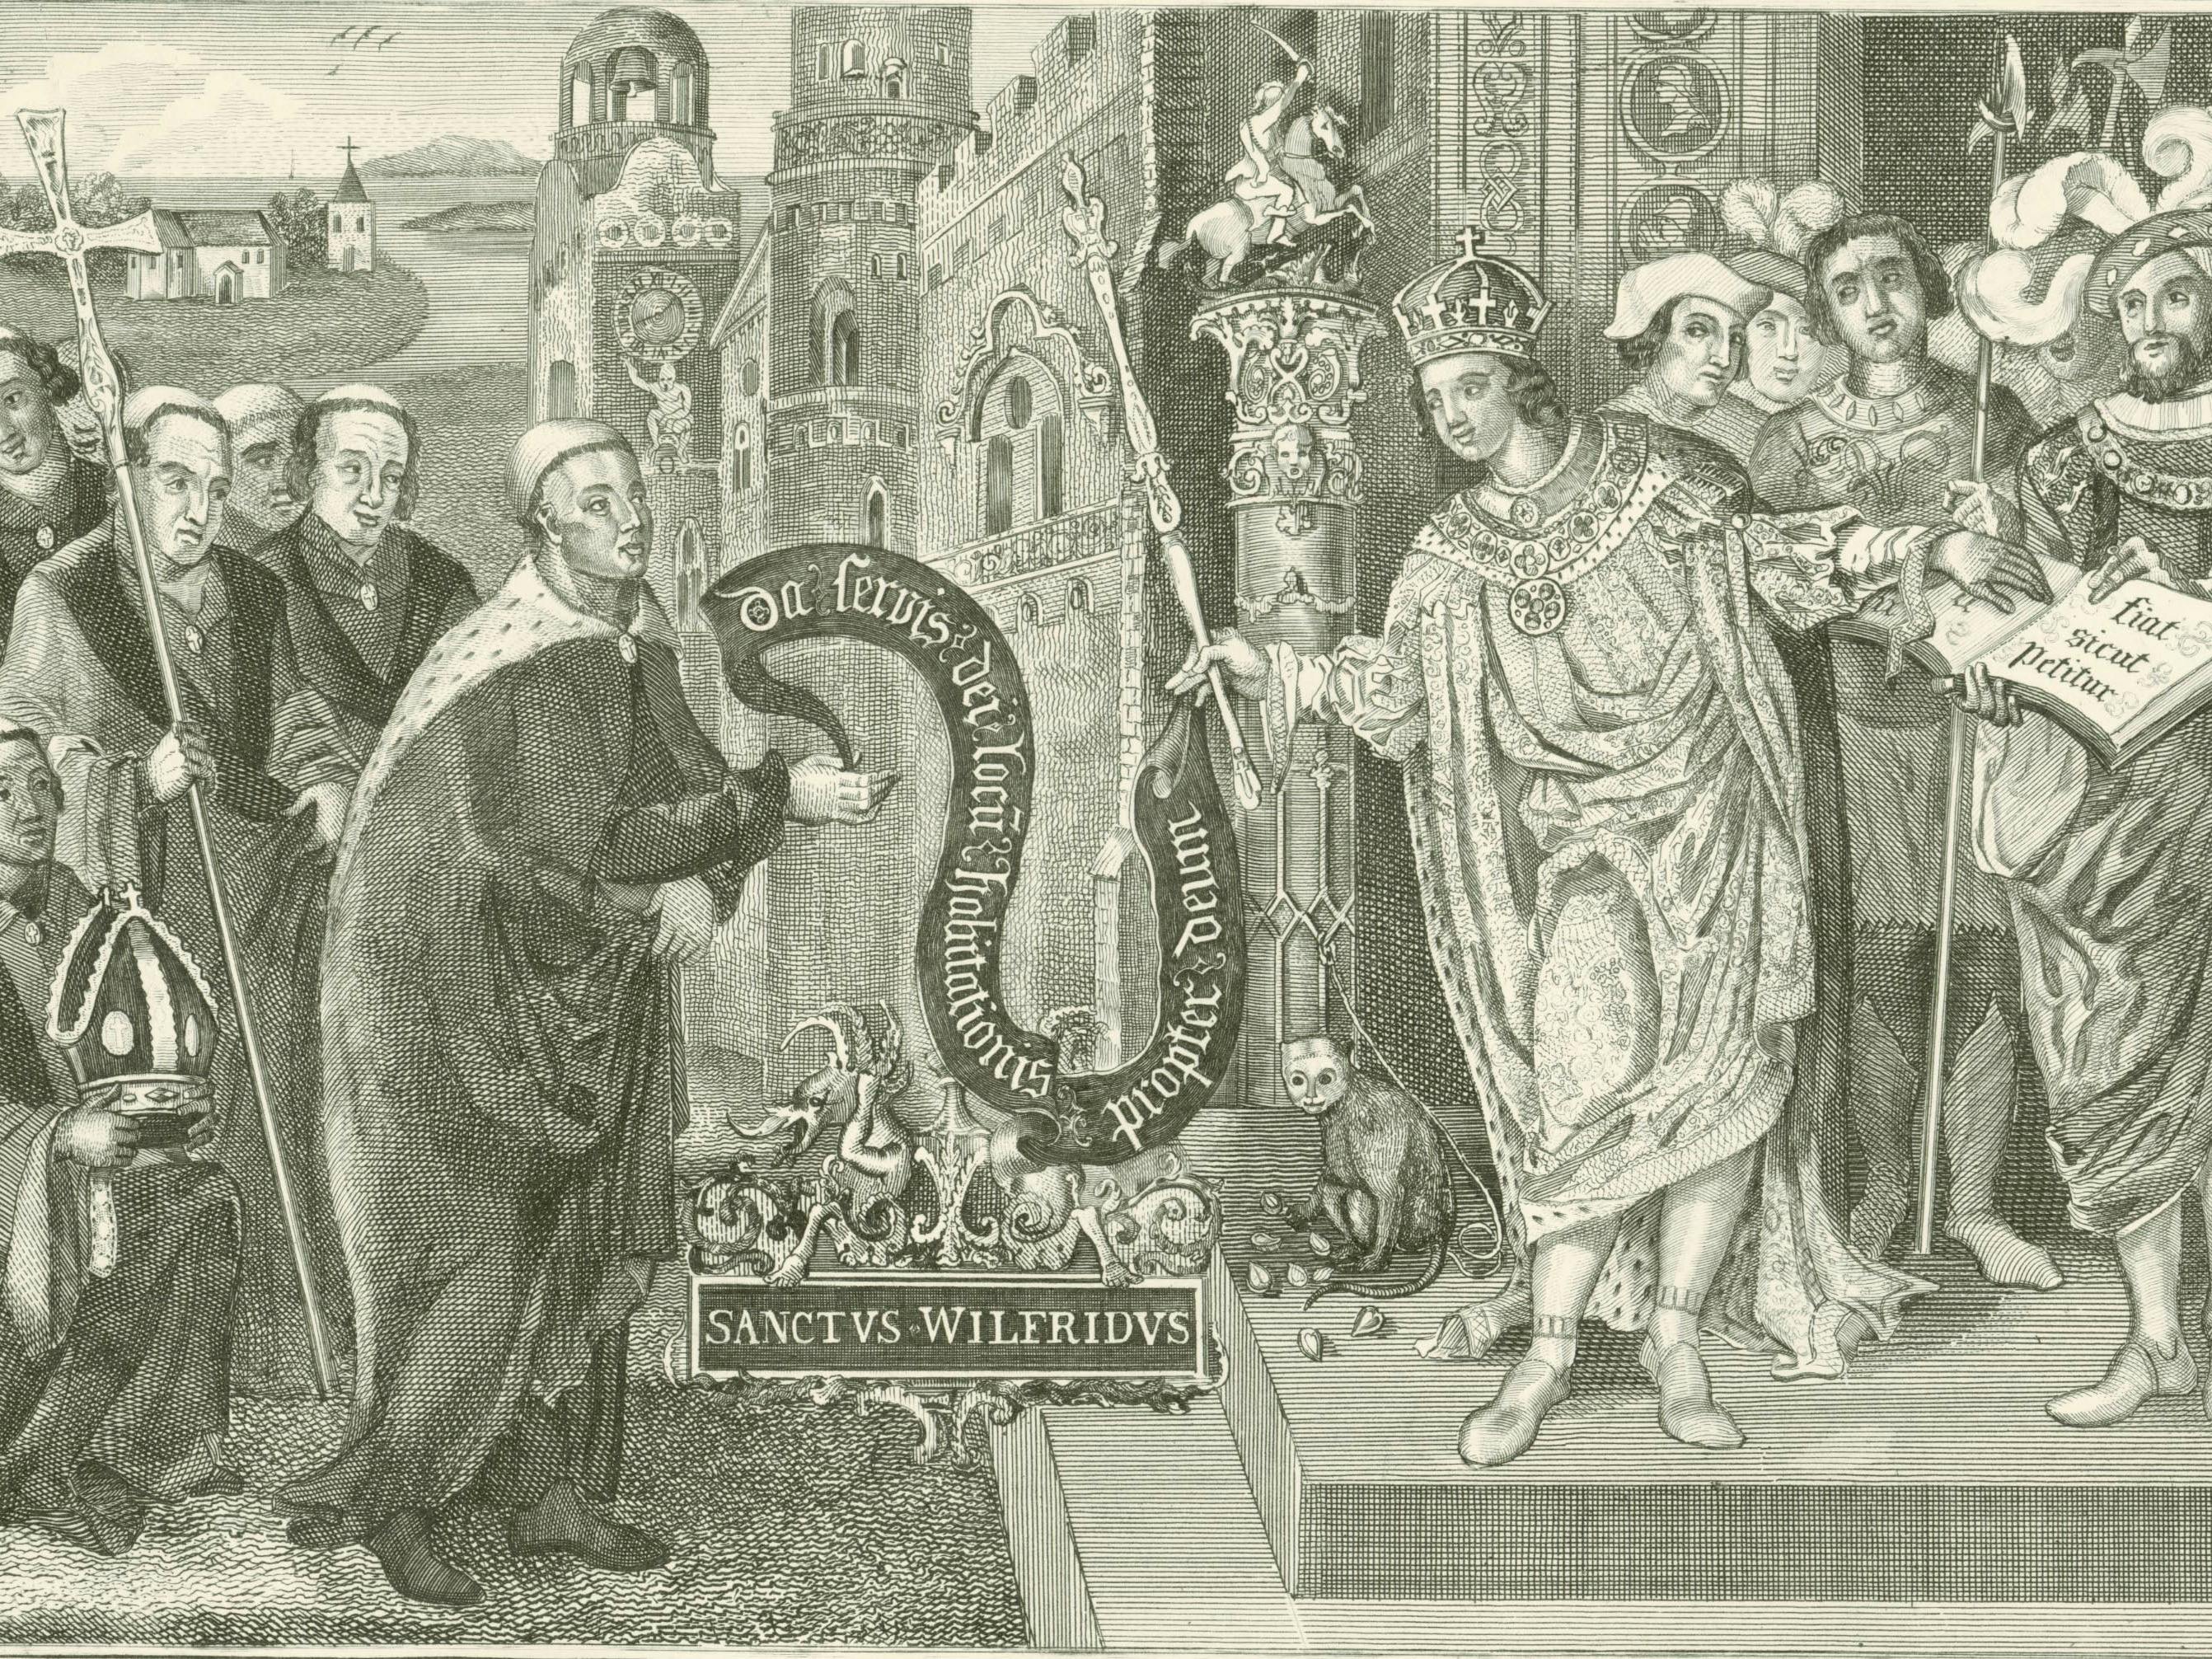 Black and white print reproduced of King Caedwalla granting land at Selsey